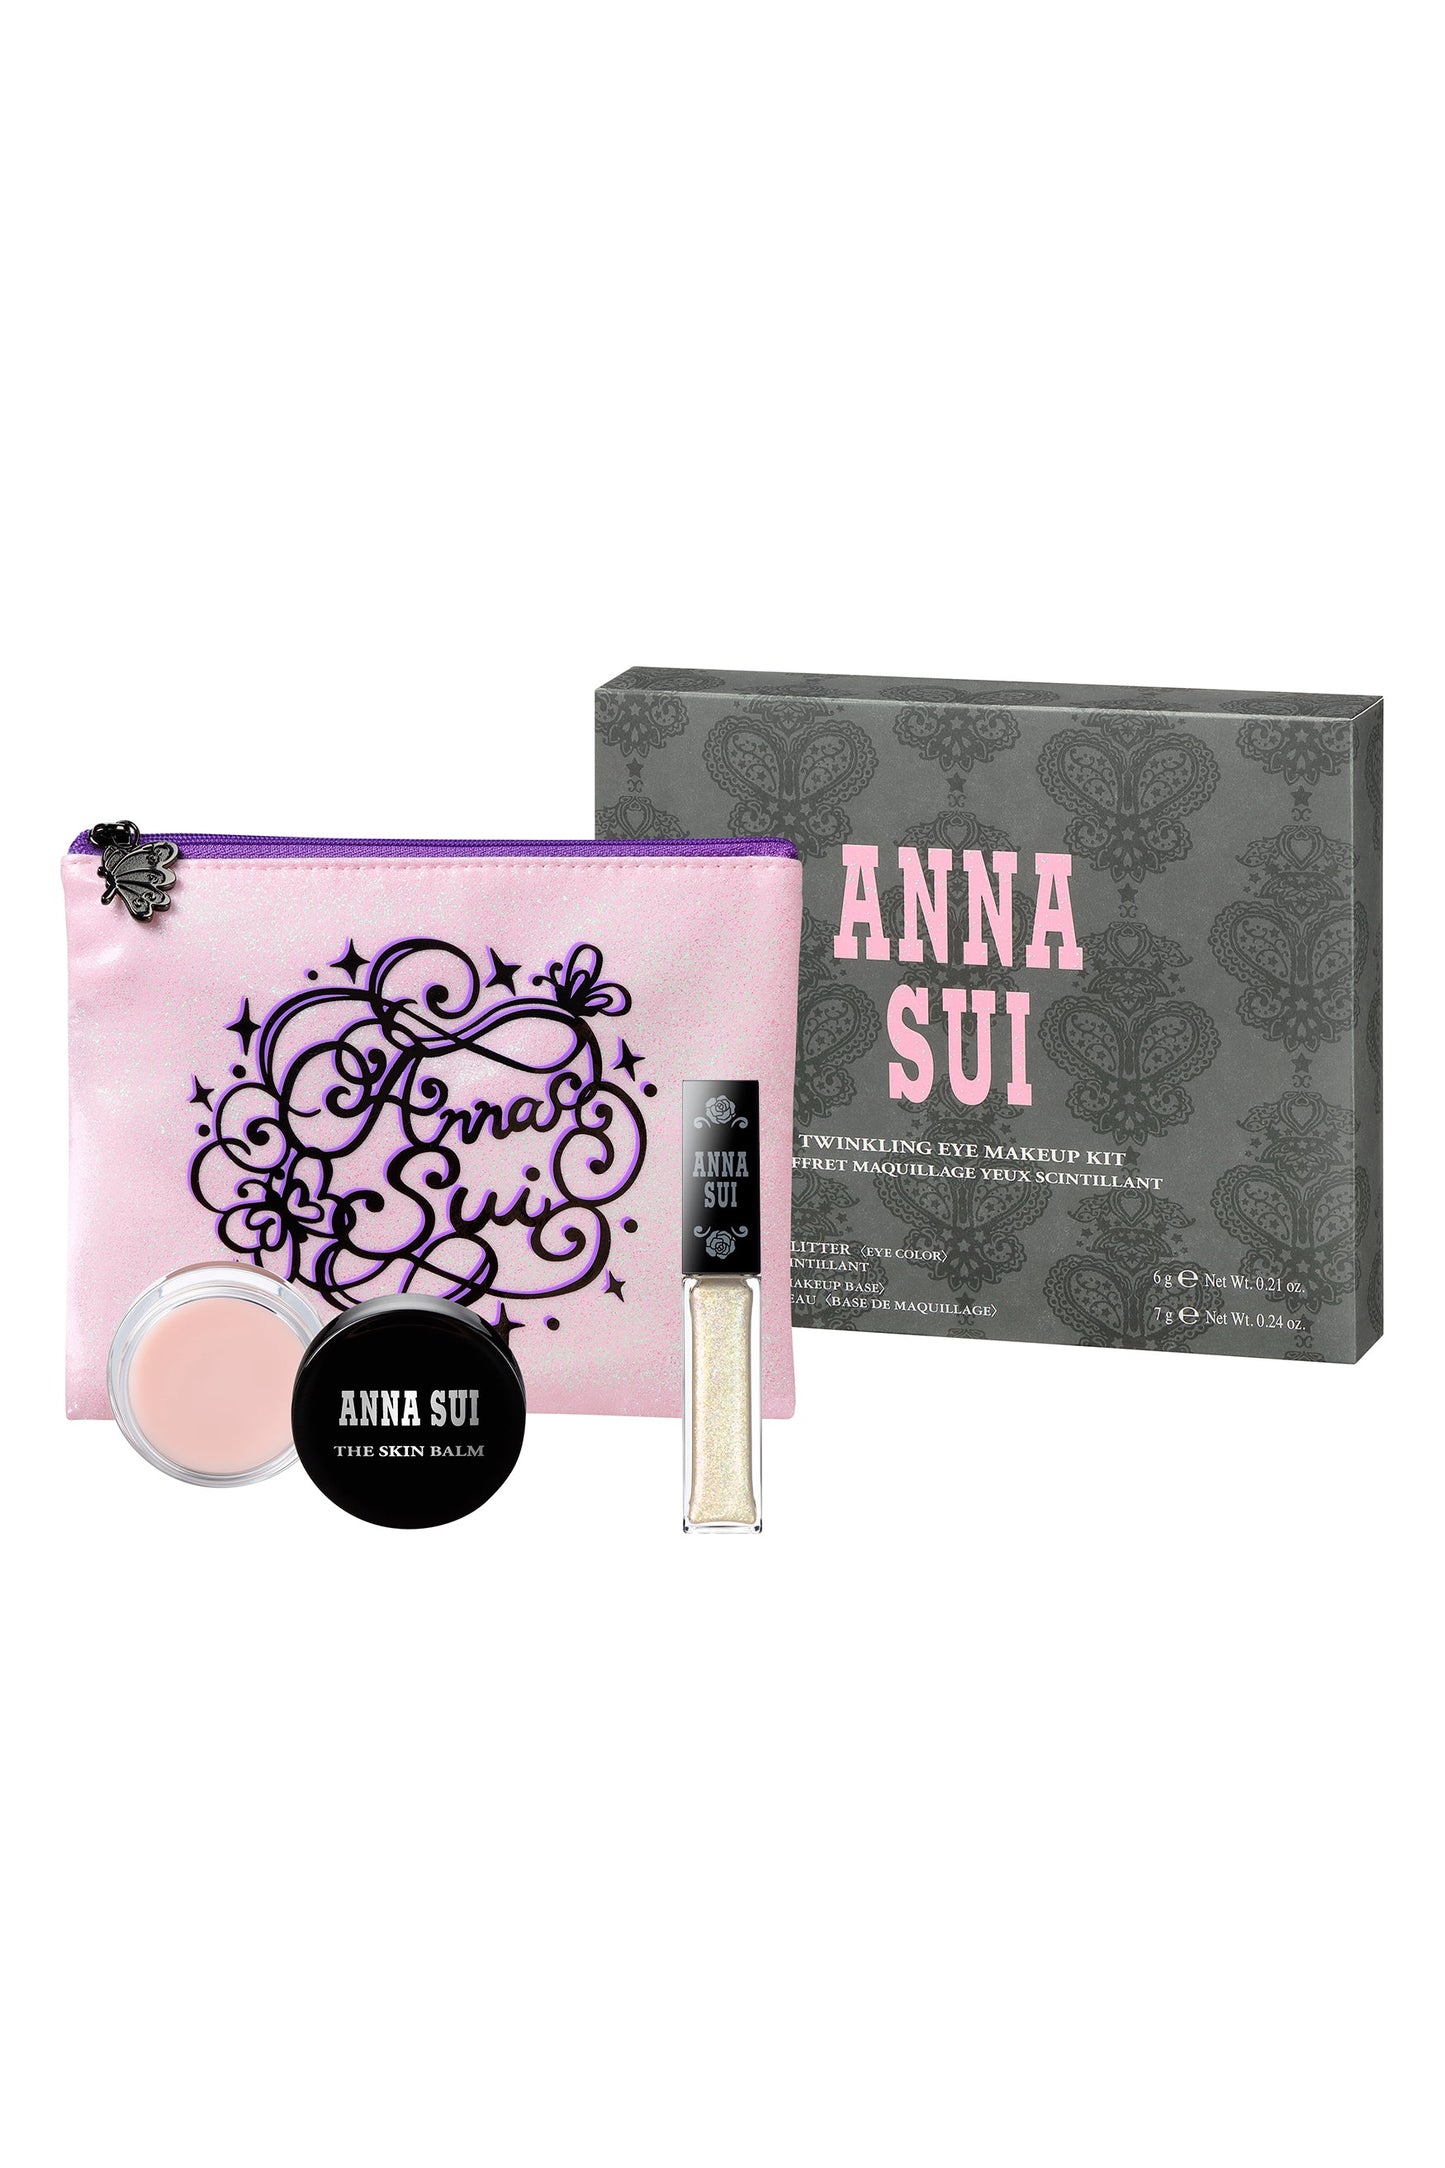 Twinkling Eye Makeup grey box, pink A.S. label, pink pouch, PEARLESCENT WHITE Eye Glitter